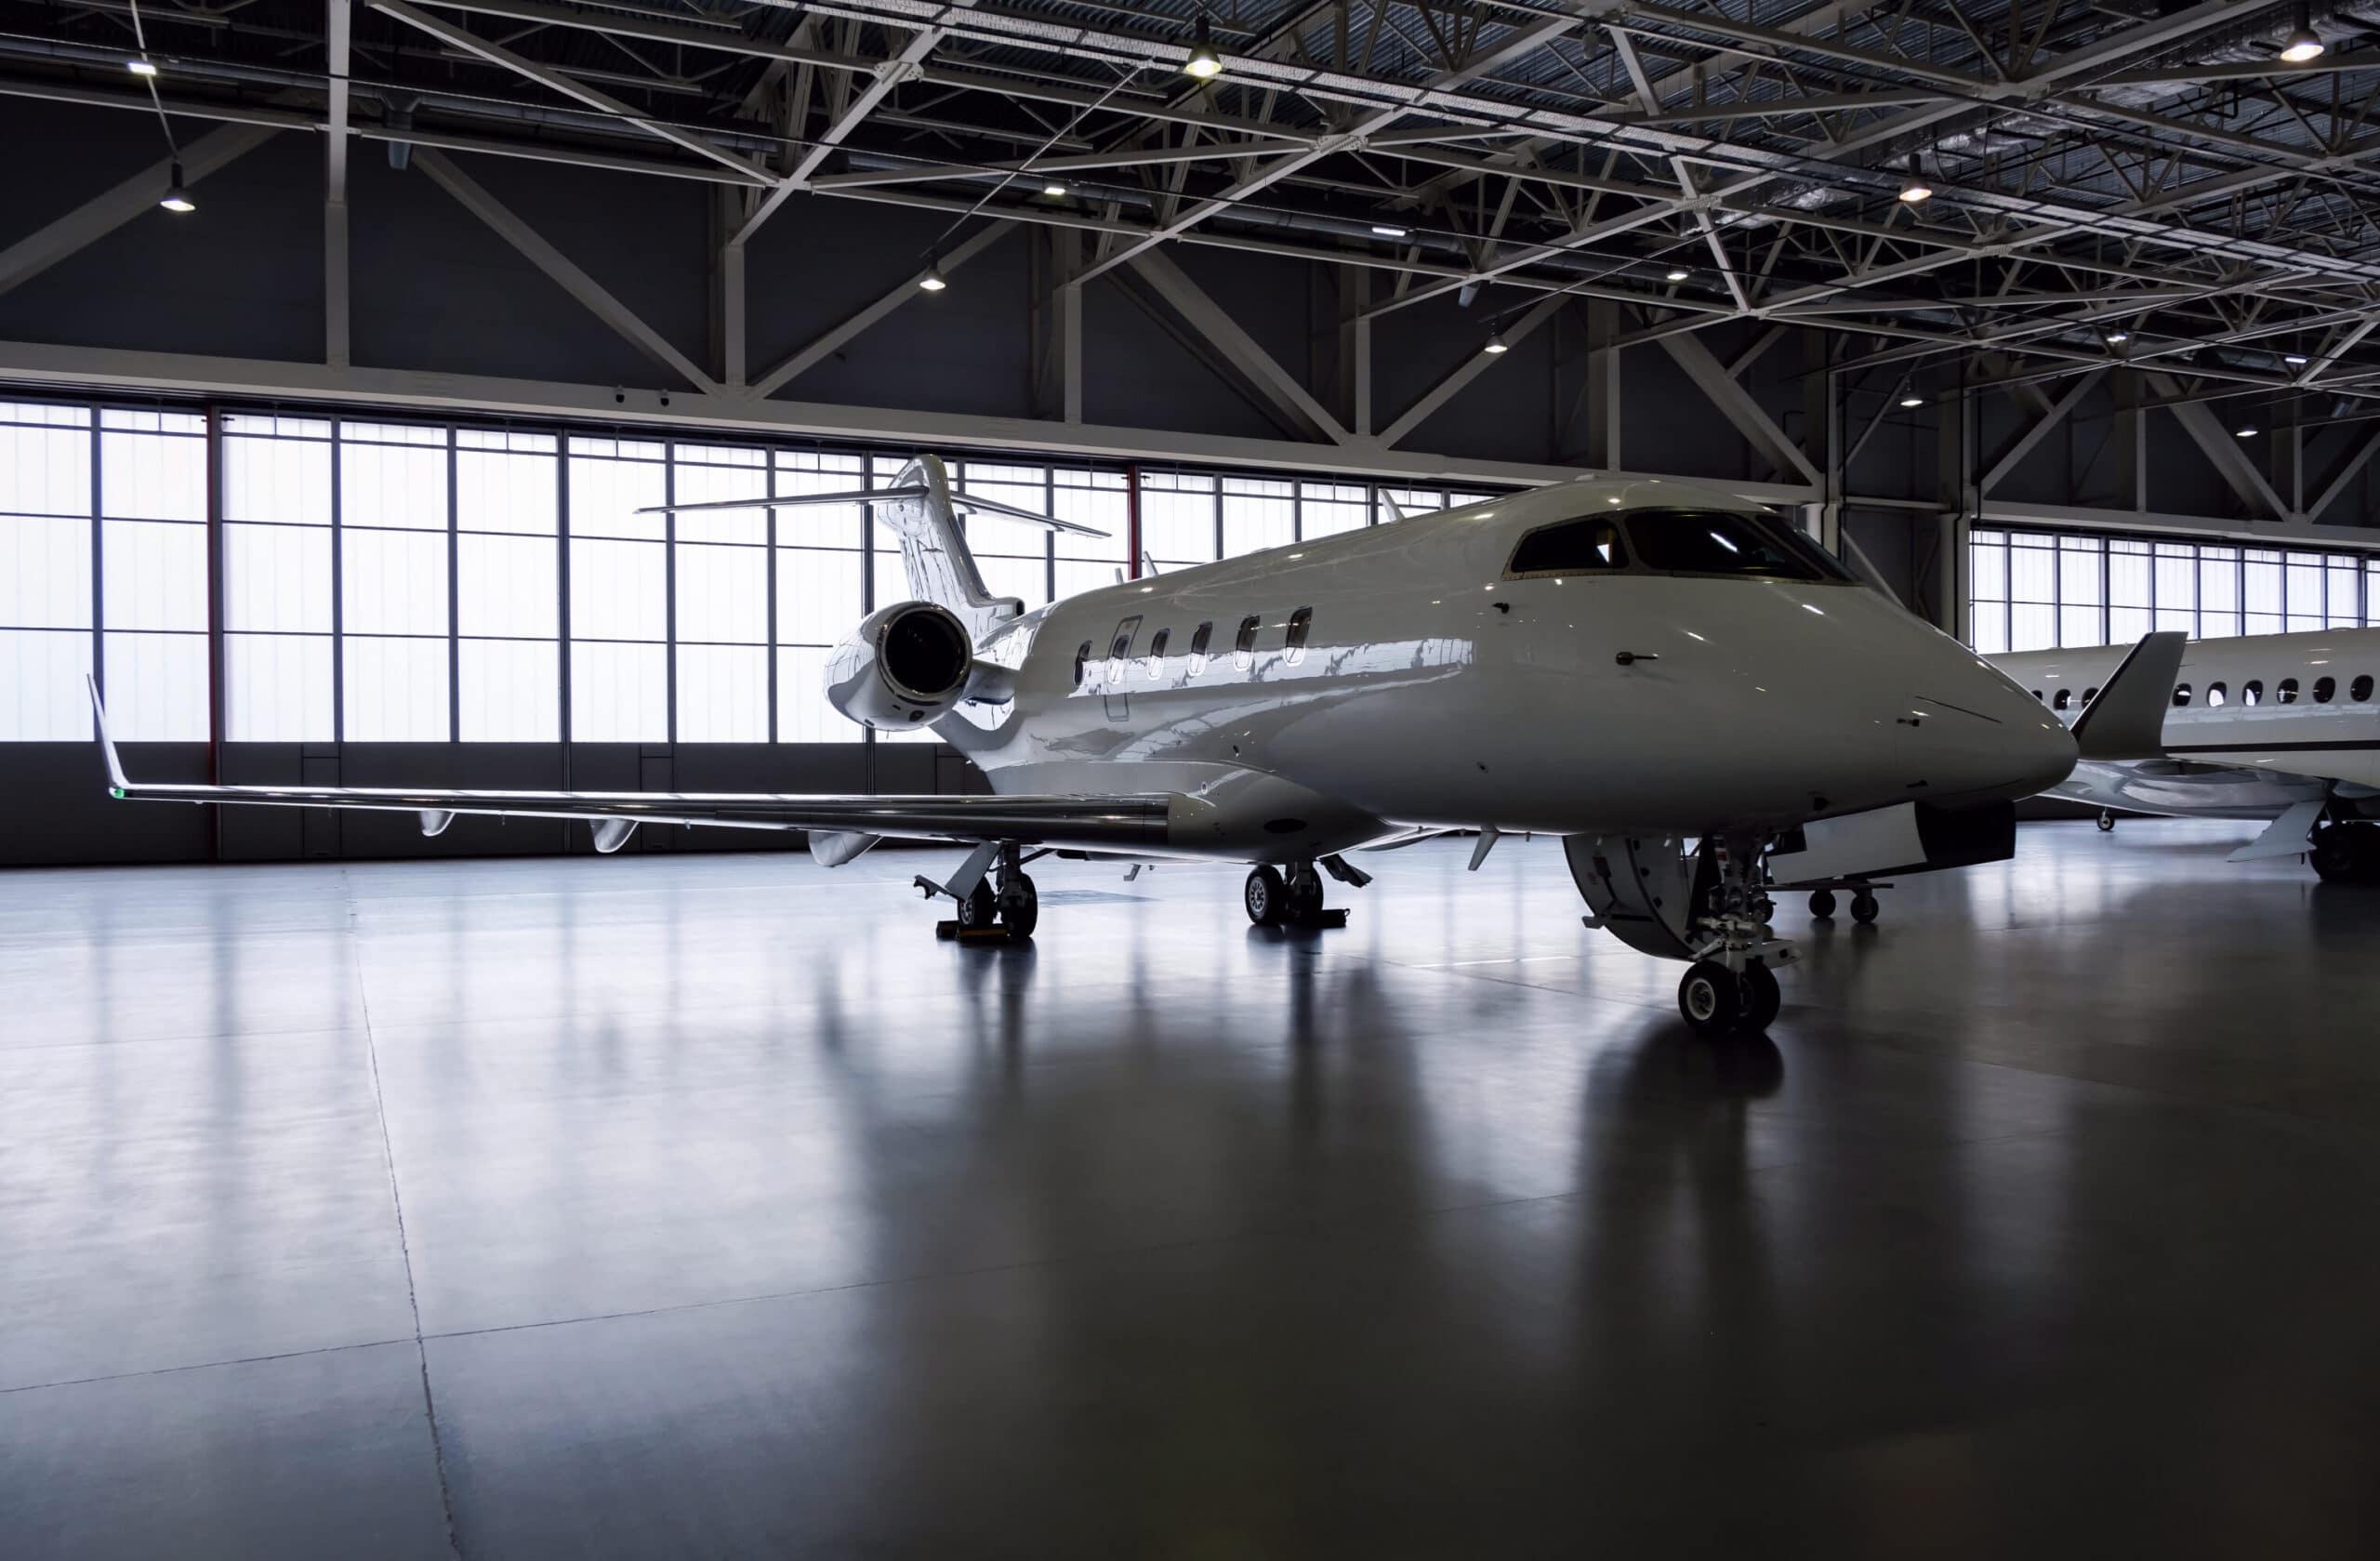 A private jet inside of a hanger, awaiting repairs.